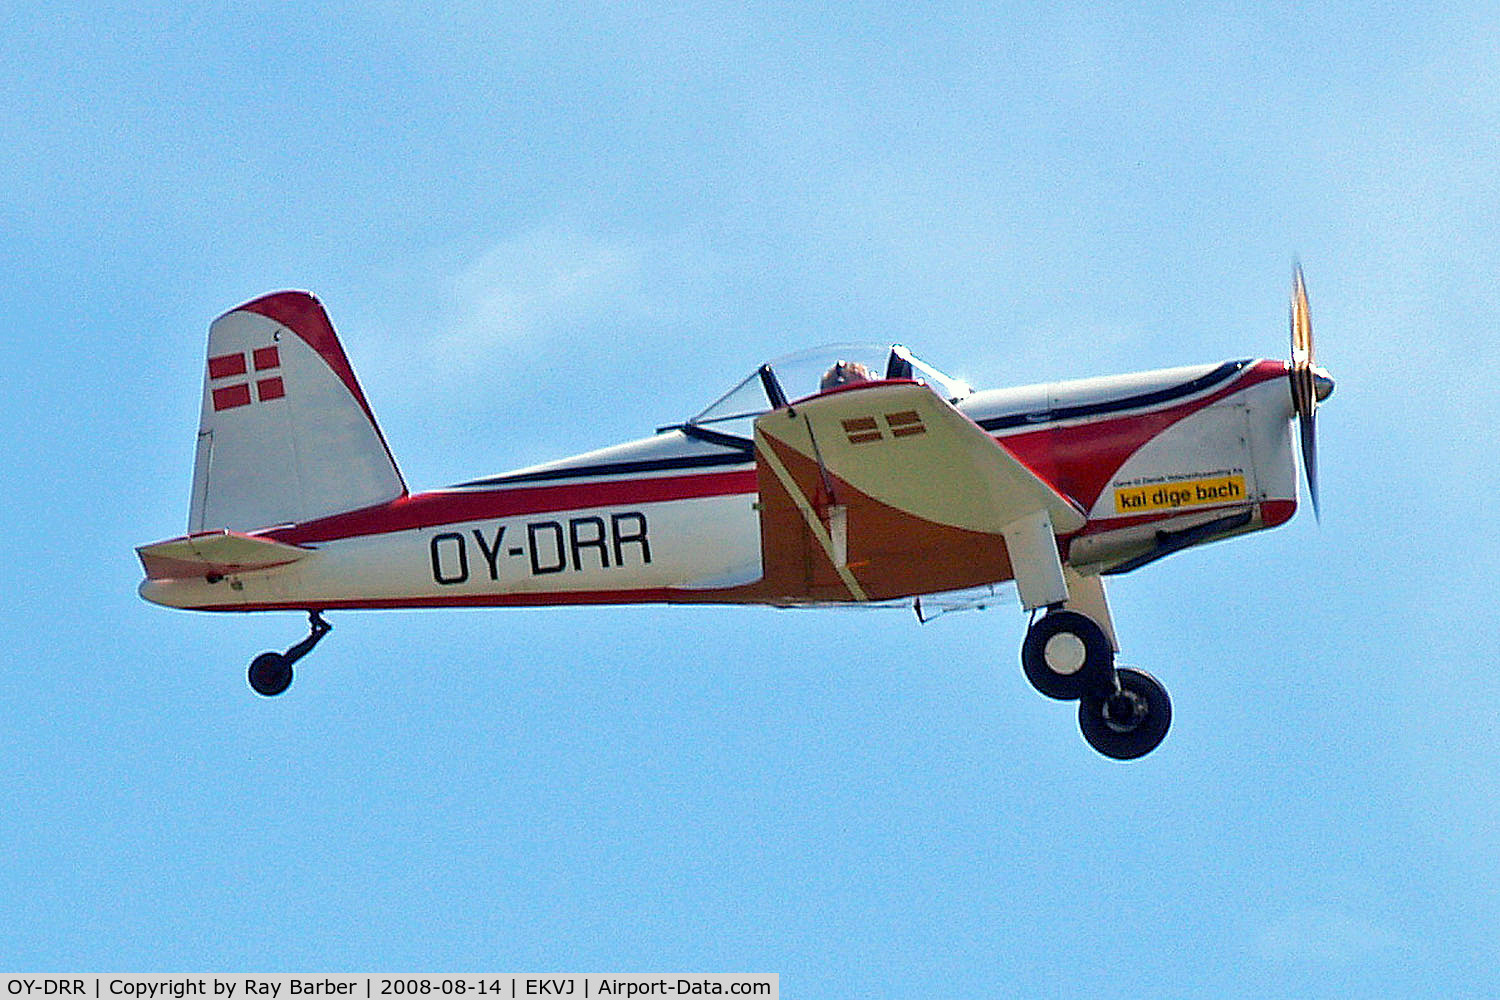 OY-DRR, 1949 SAI KZ VIII C/N 203, OY-DRR   S.A.I. KZ VIII [203] (Danmarks Flymuseum) Stauning~OY 14/06/2008